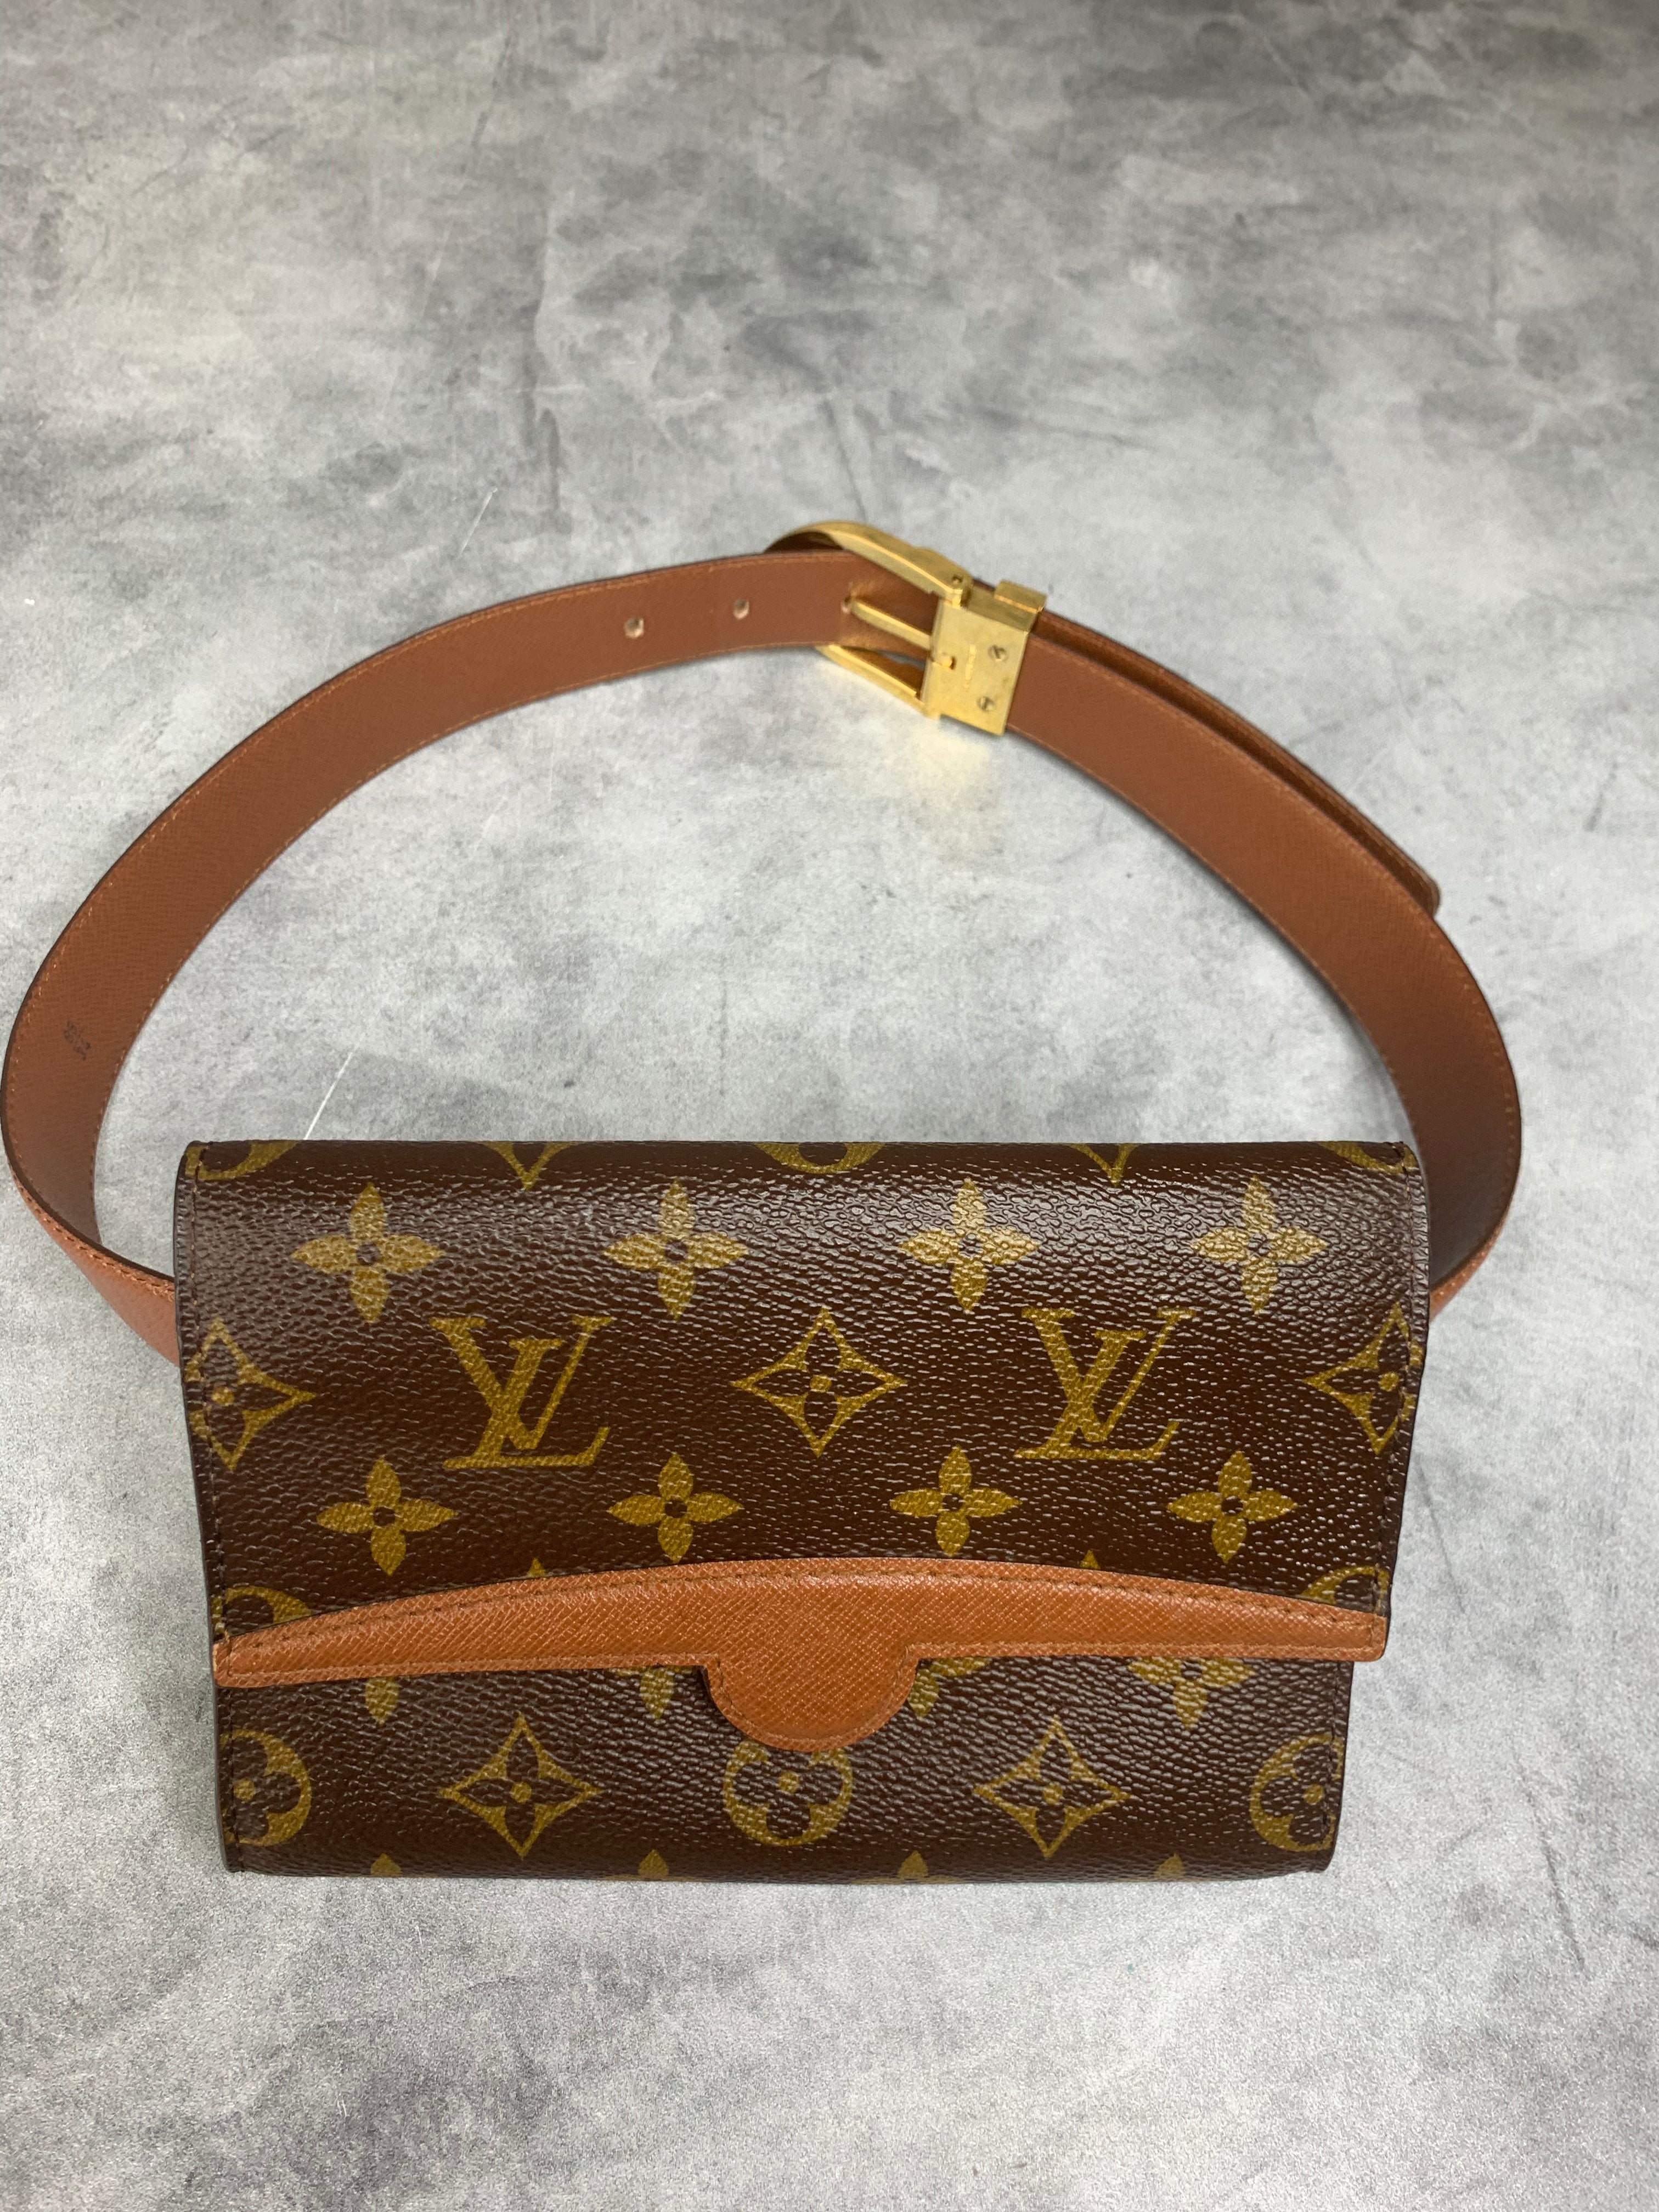 Packing for a Week in the City  Vintage louis vuitton handbags